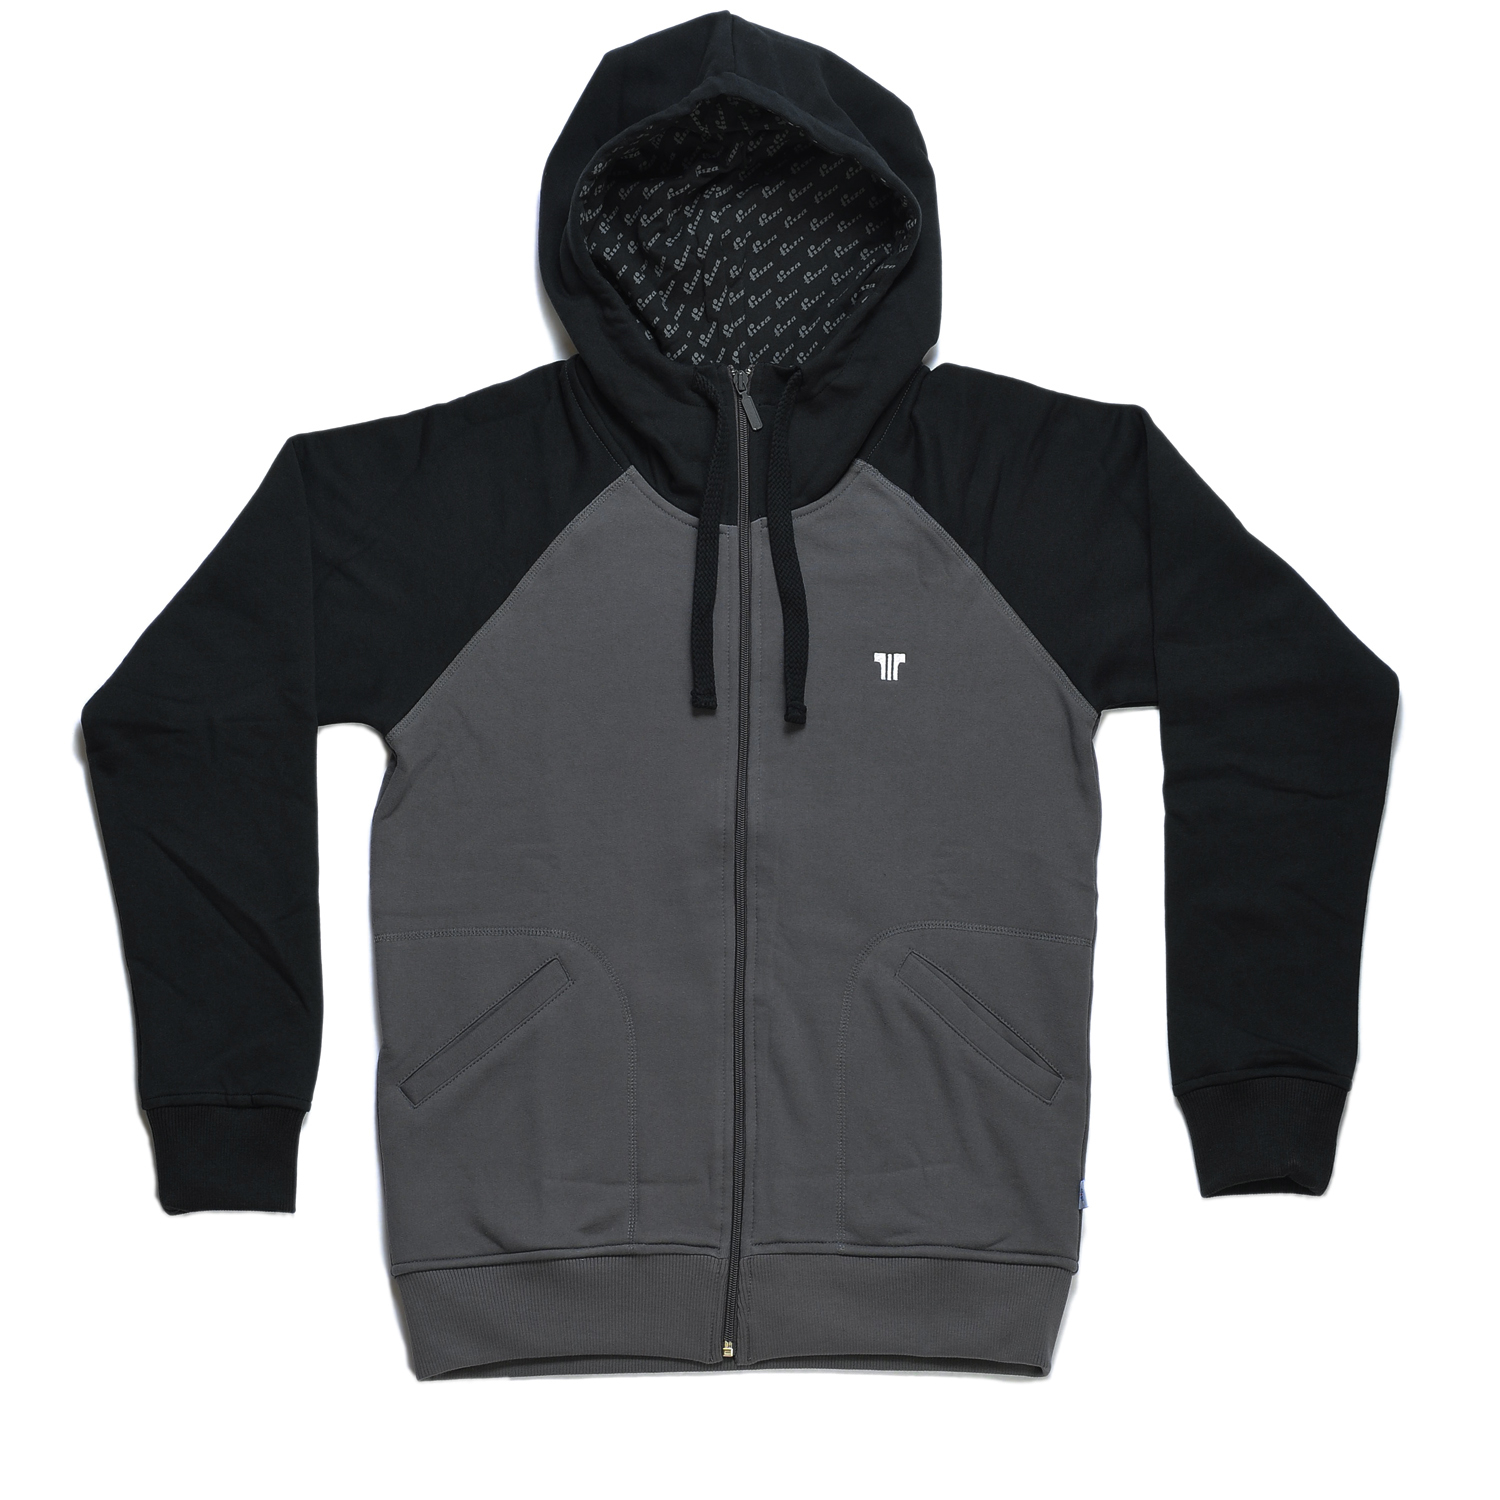 Tisza shoes - Pullover - Grey-black hoodie